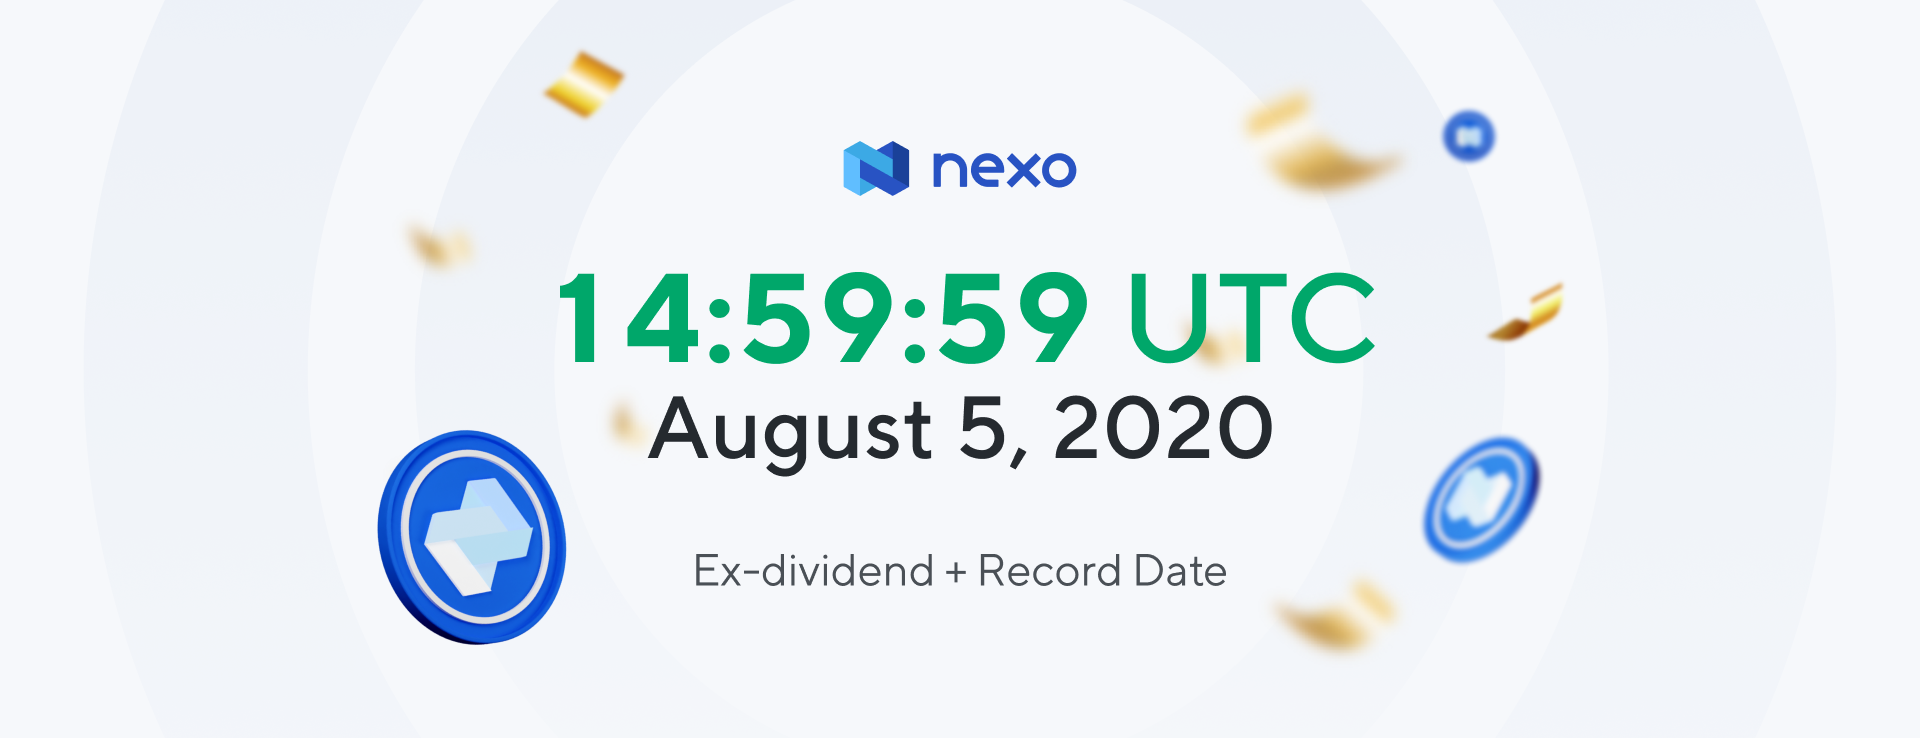 The Official Record and Ex-dividend Date: August 5